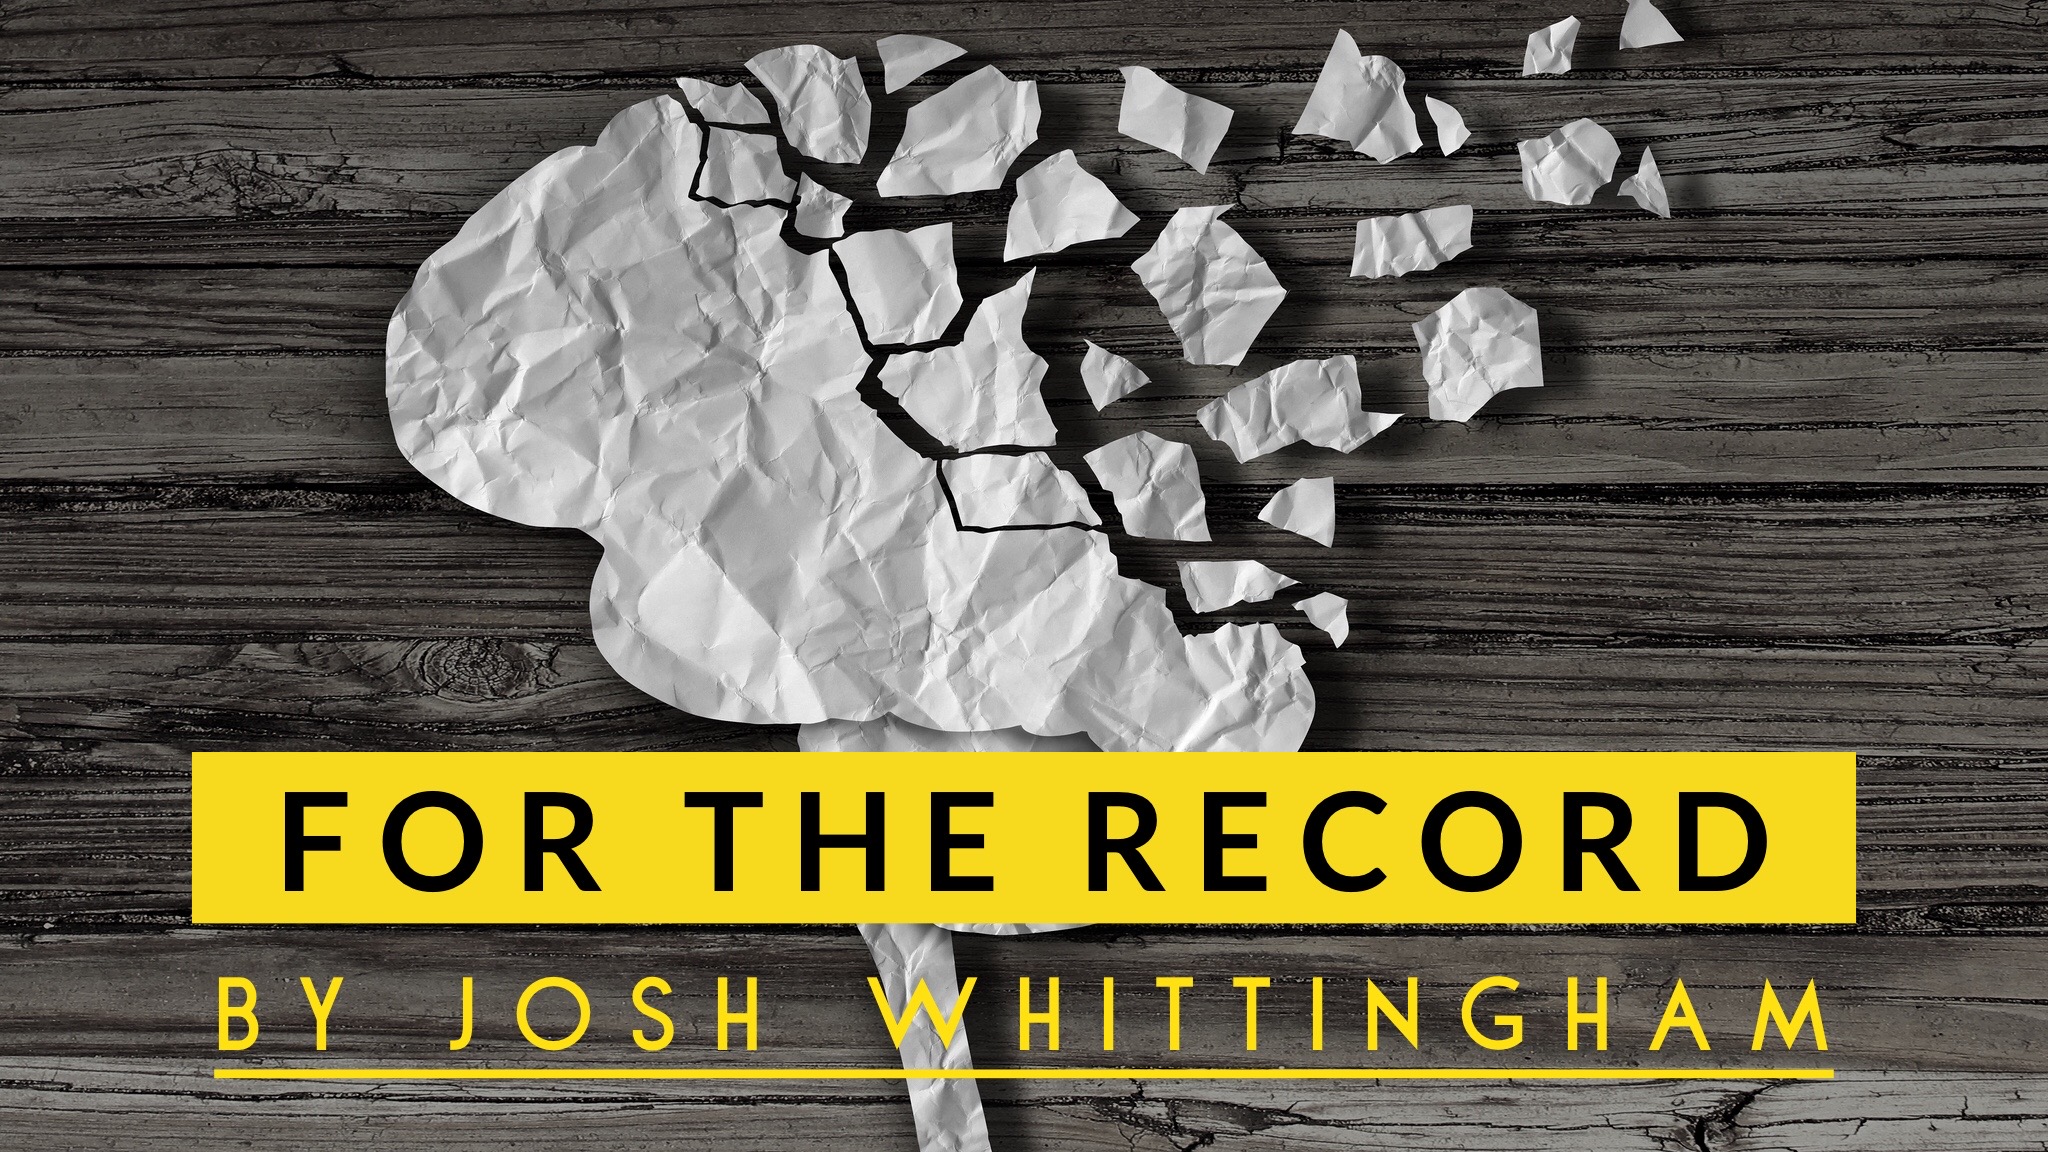 For The Record, an audio drama by Josh Whittingham.